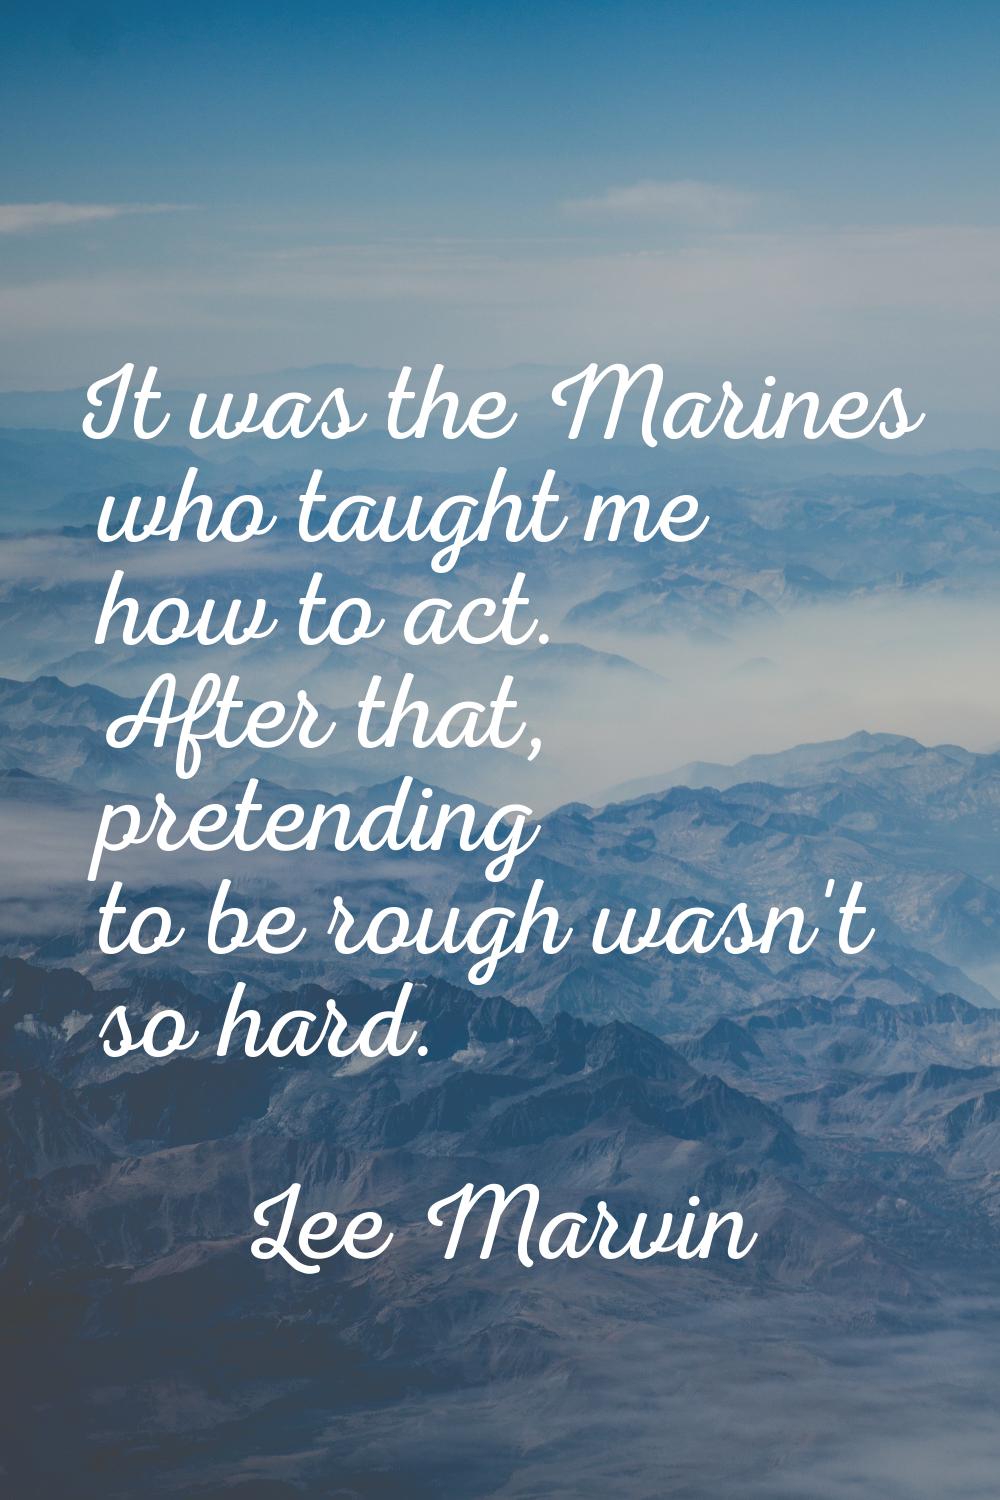 It was the Marines who taught me how to act. After that, pretending to be rough wasn't so hard.